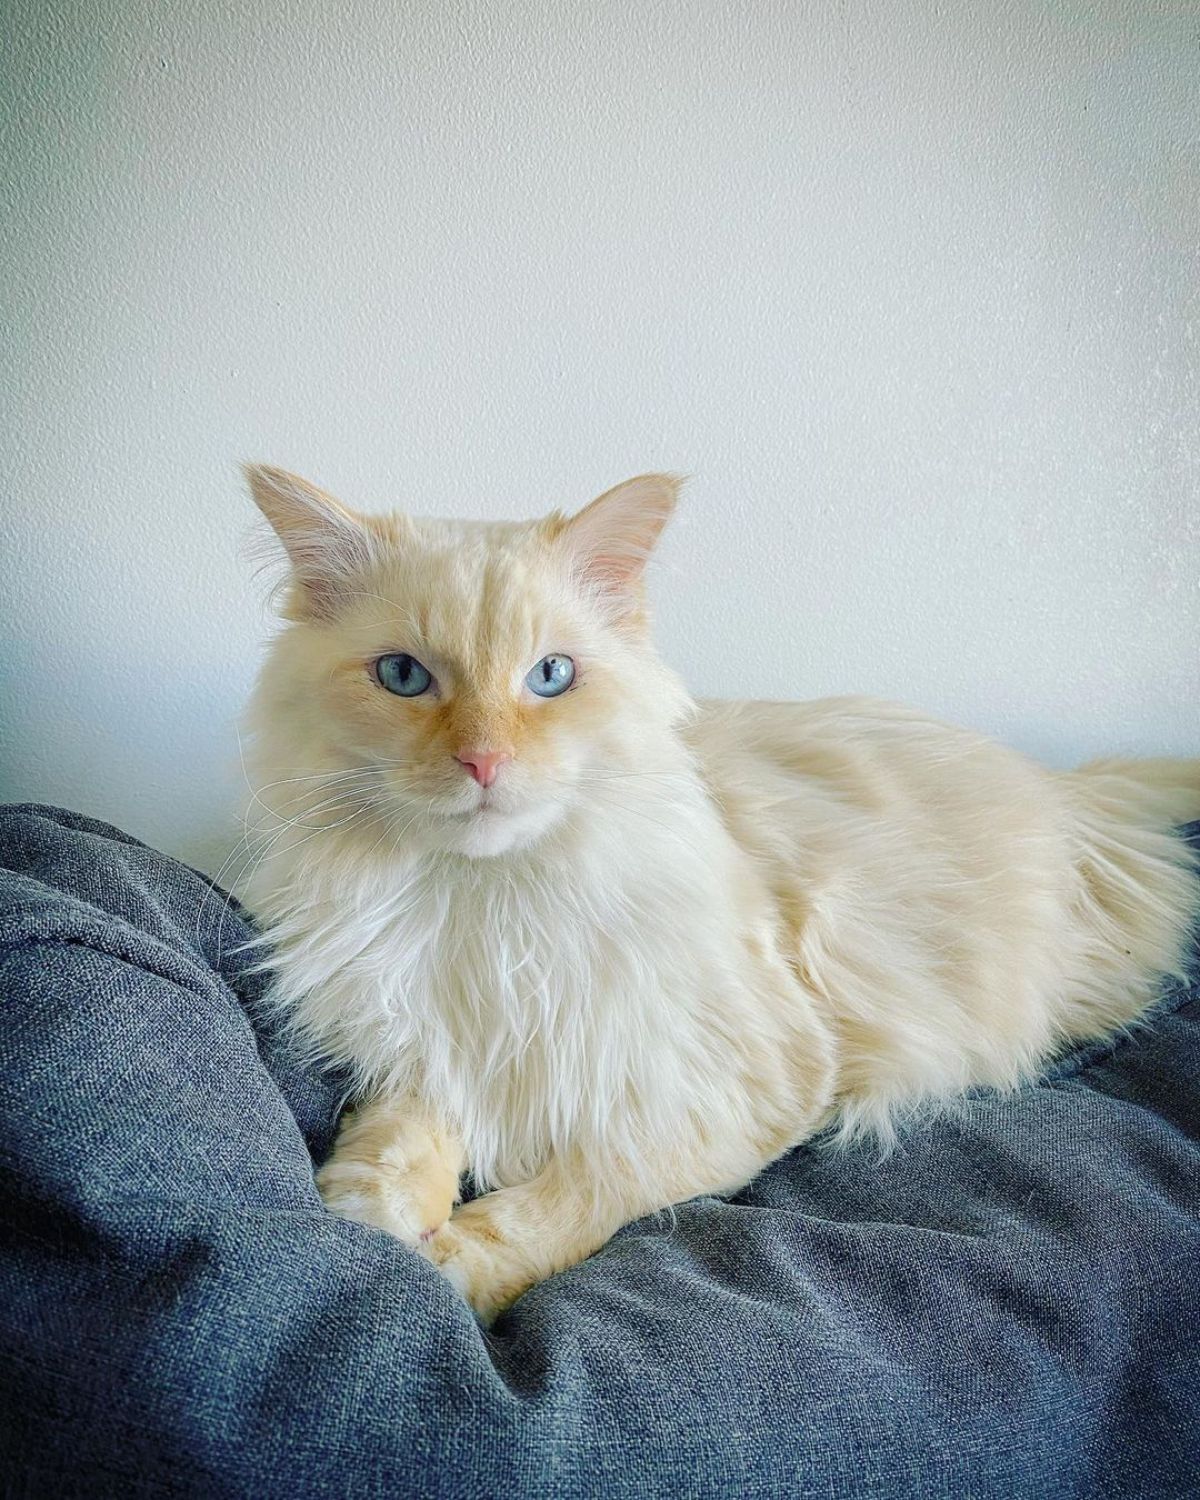 A cream fluffy maine coon lying on a gray blanket.